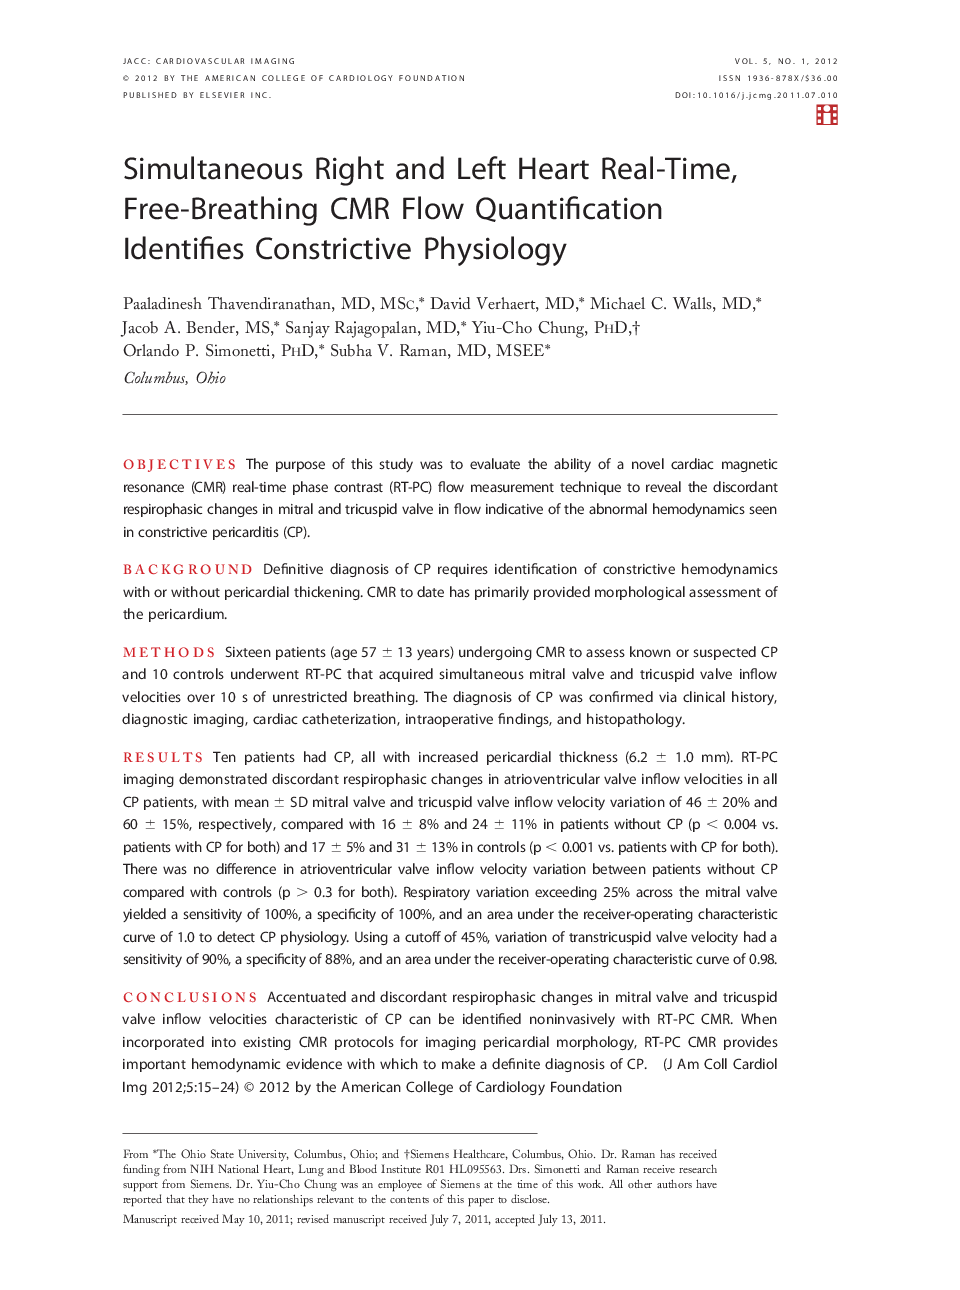 Simultaneous Right and Left Heart Real-Time, Free-Breathing CMR Flow Quantification Identifies Constrictive Physiology 